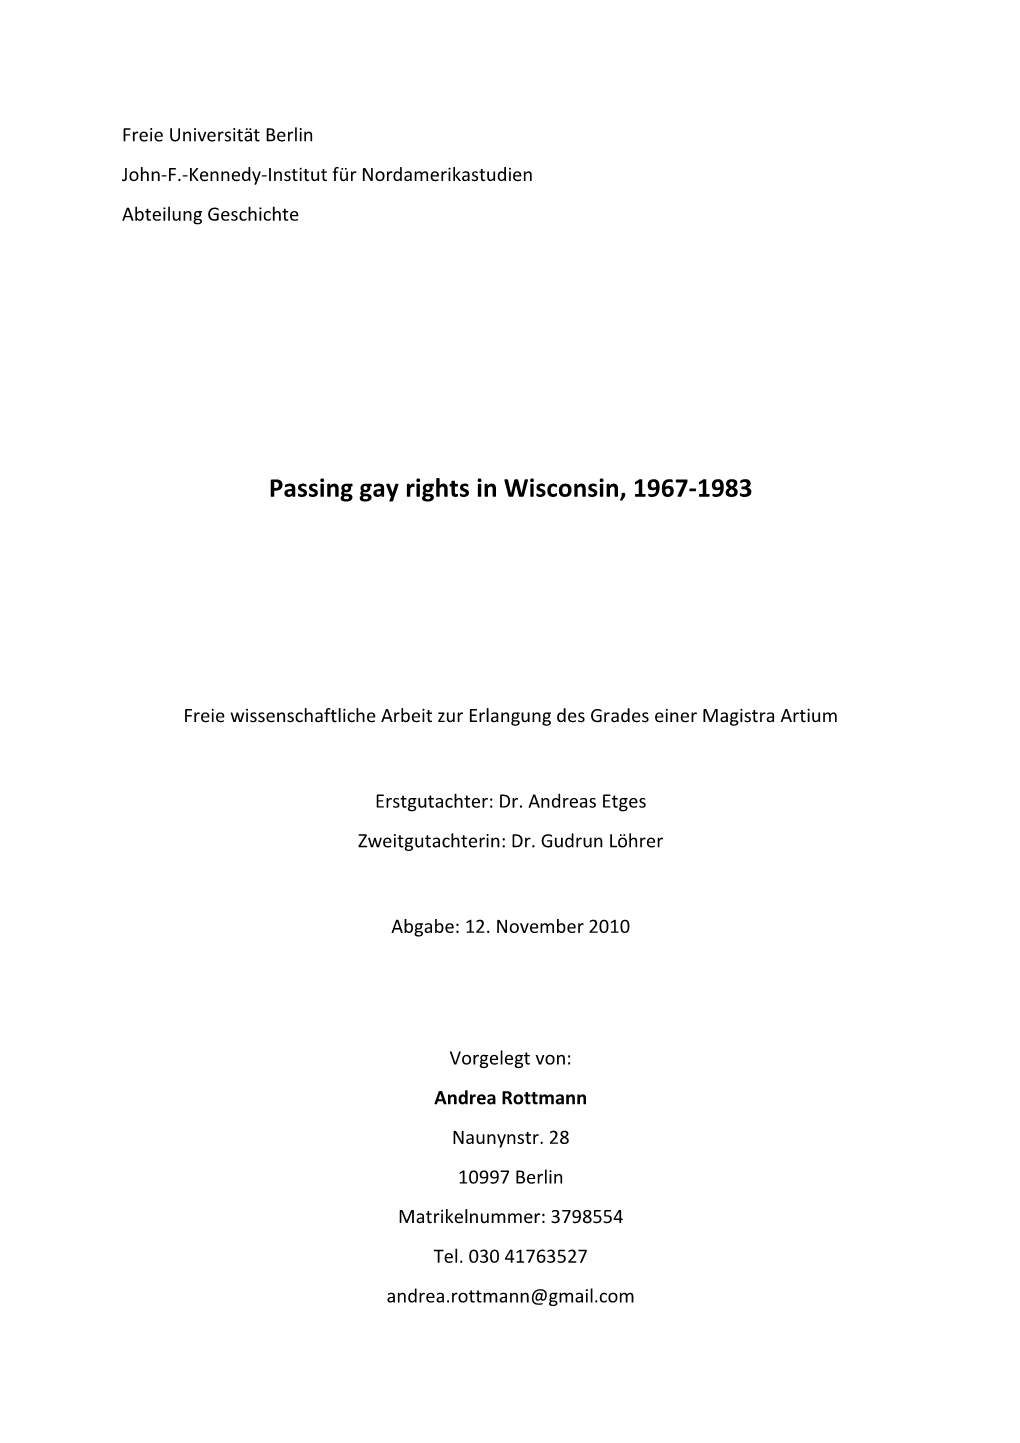 Passing Gay Rights in Wisconsin, 1967-1983